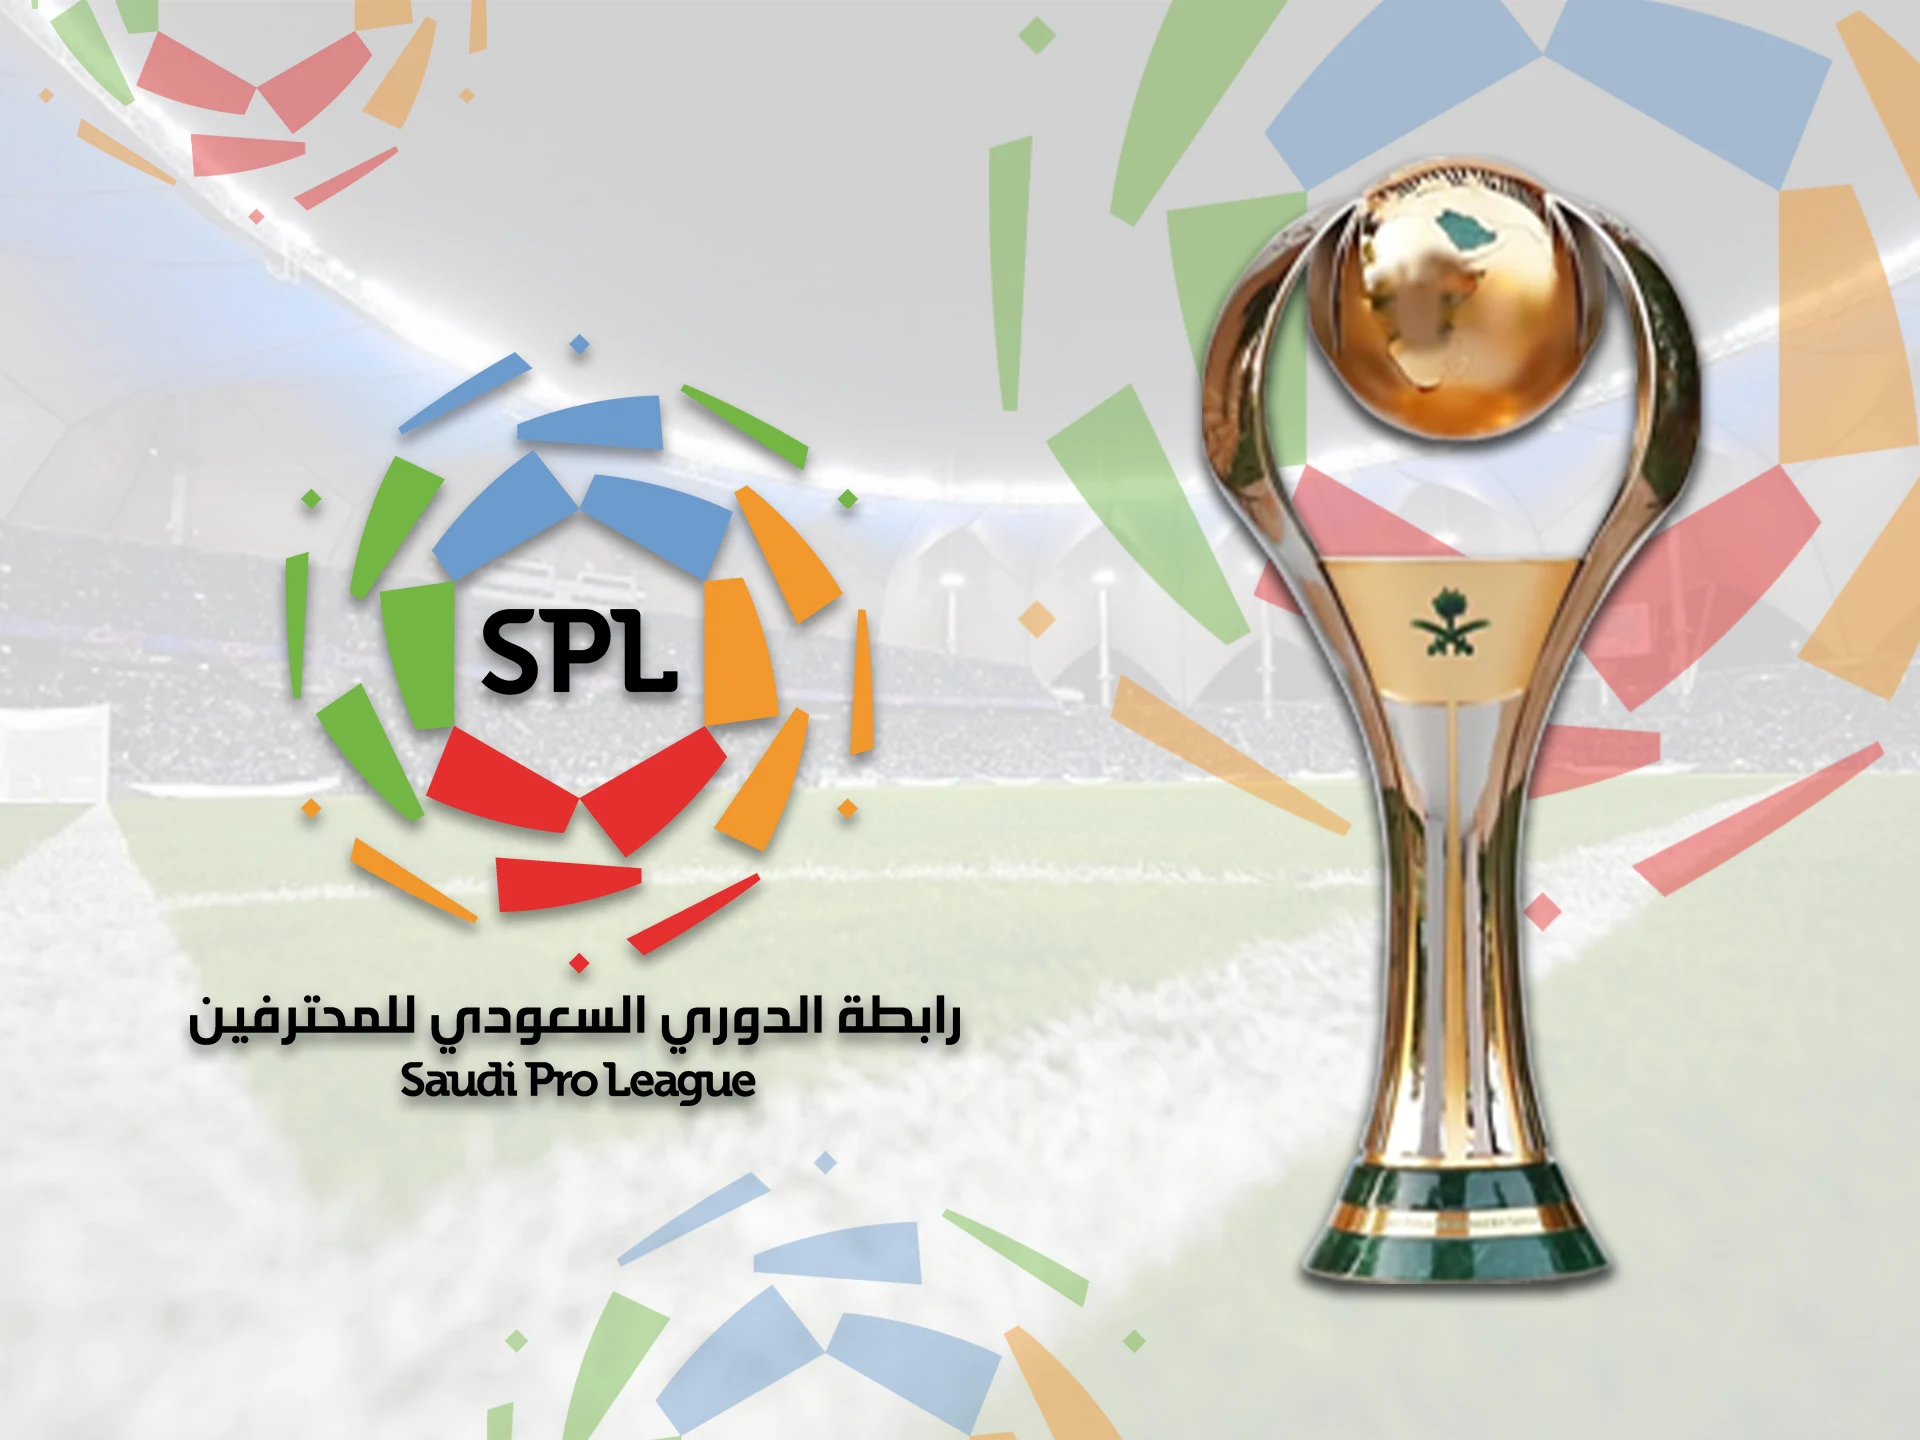 Betting on the Saudi Pro League is gaining popularity among bettors.